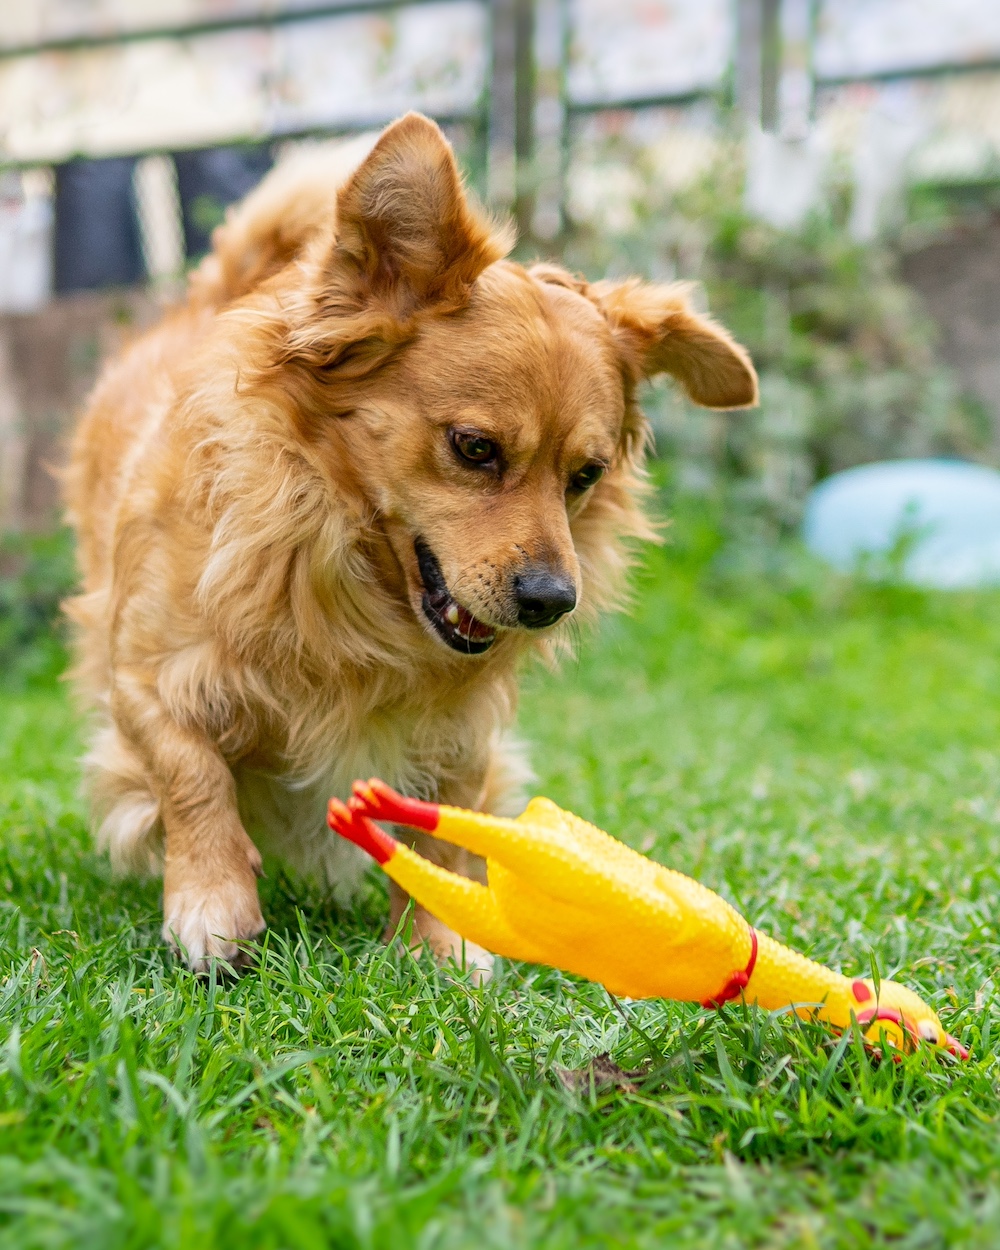 A dog playing with a rubber chicken.